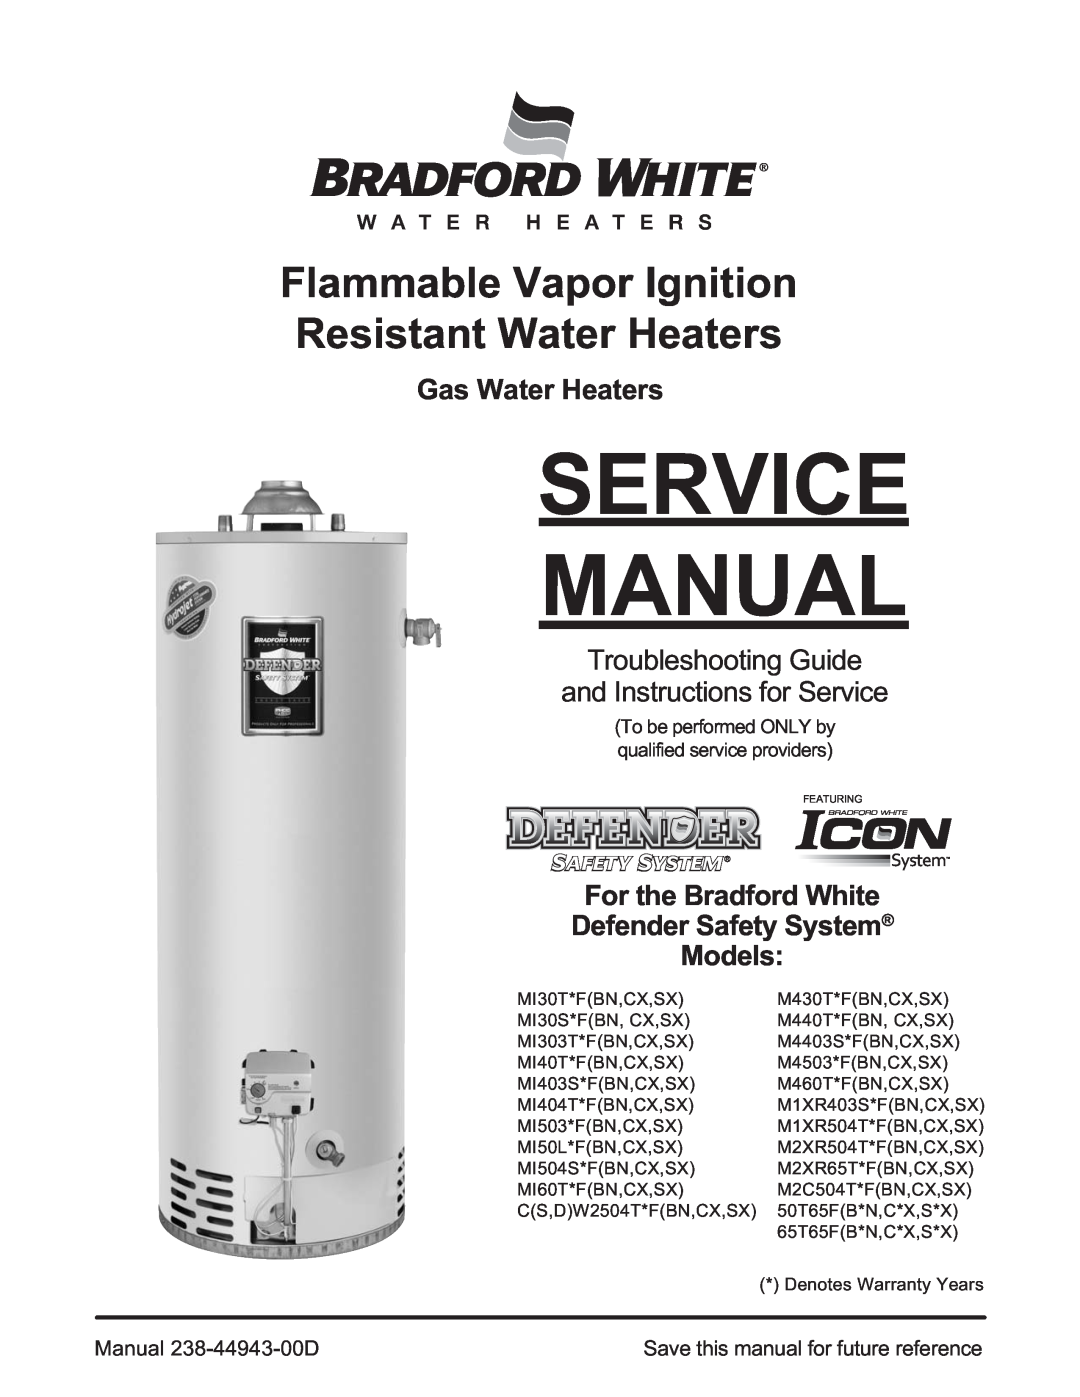 Bradford-White Corp Flammable Vapor Ignition Risistant Water Heaters service manual Service Manual, Gas Water Heaters 